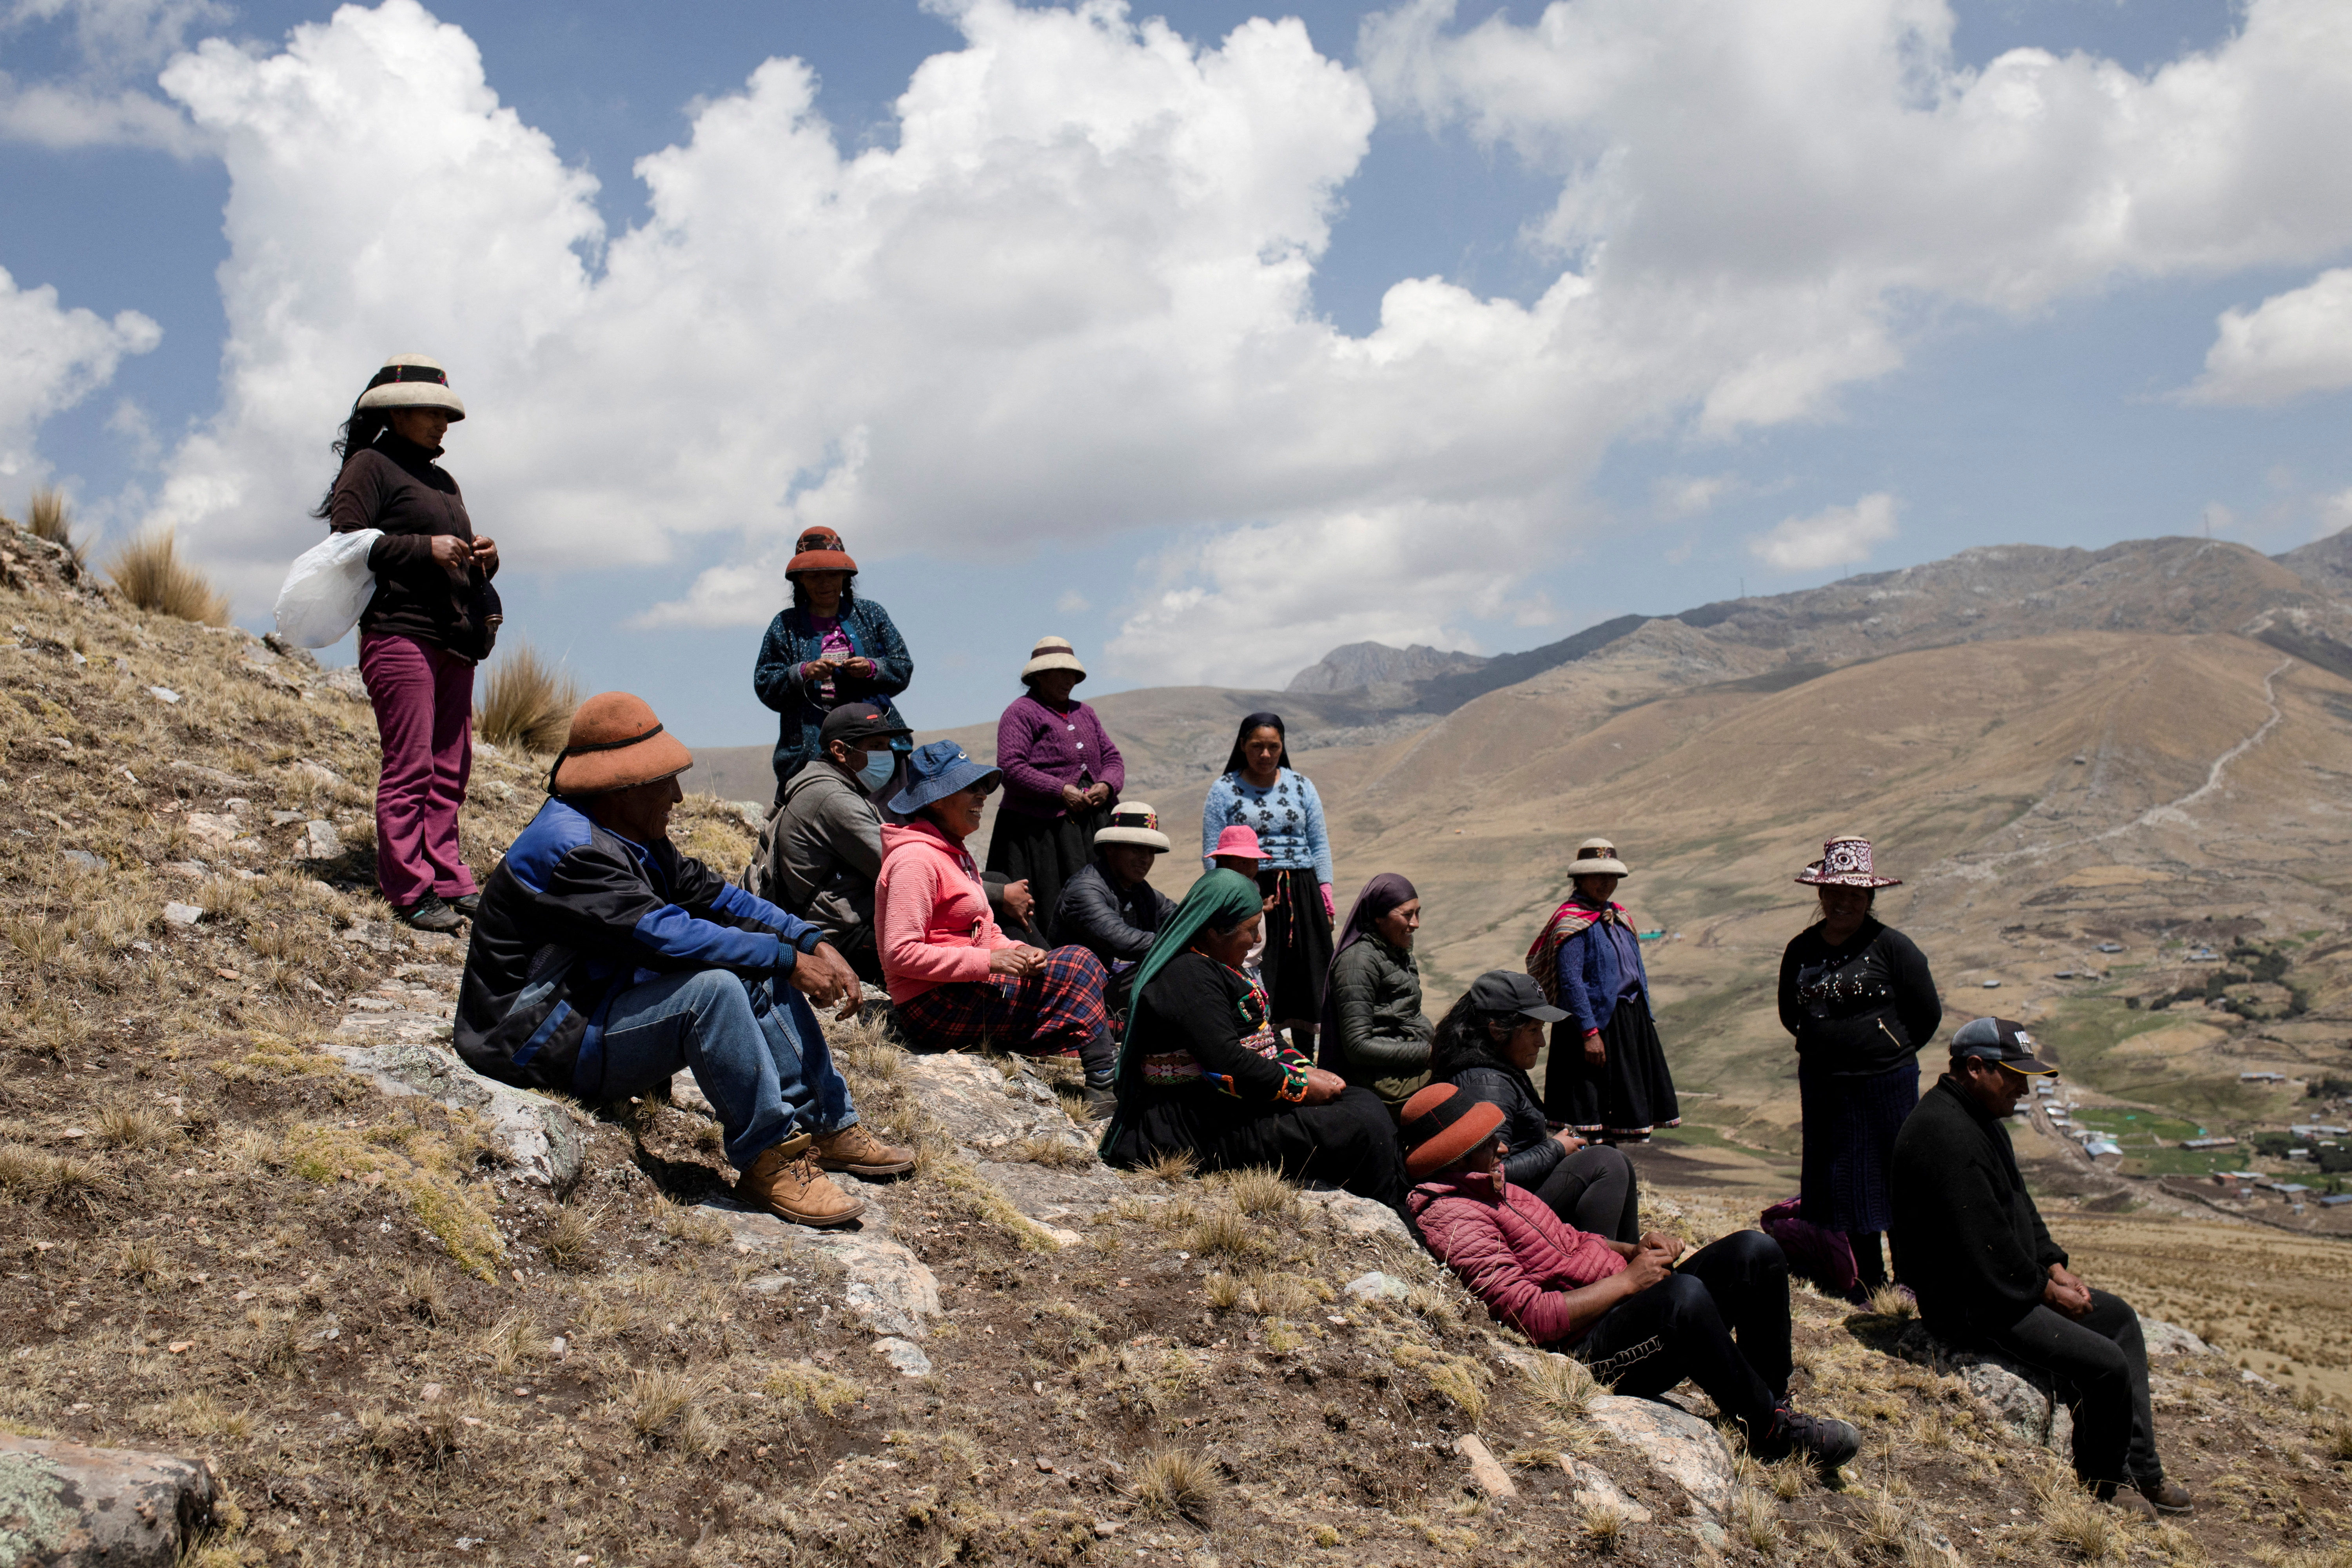 FILE PHOTO: People sit in the mountains in front of a mine operated by MMG Las Bambas, in a region where locals claim mining activity has negatively affected crop yields and killed livestock, outside of Cusco, Peru October 14, 2021. Picture taken October 14, 2021. REUTERS/Angela Ponce/File Photo